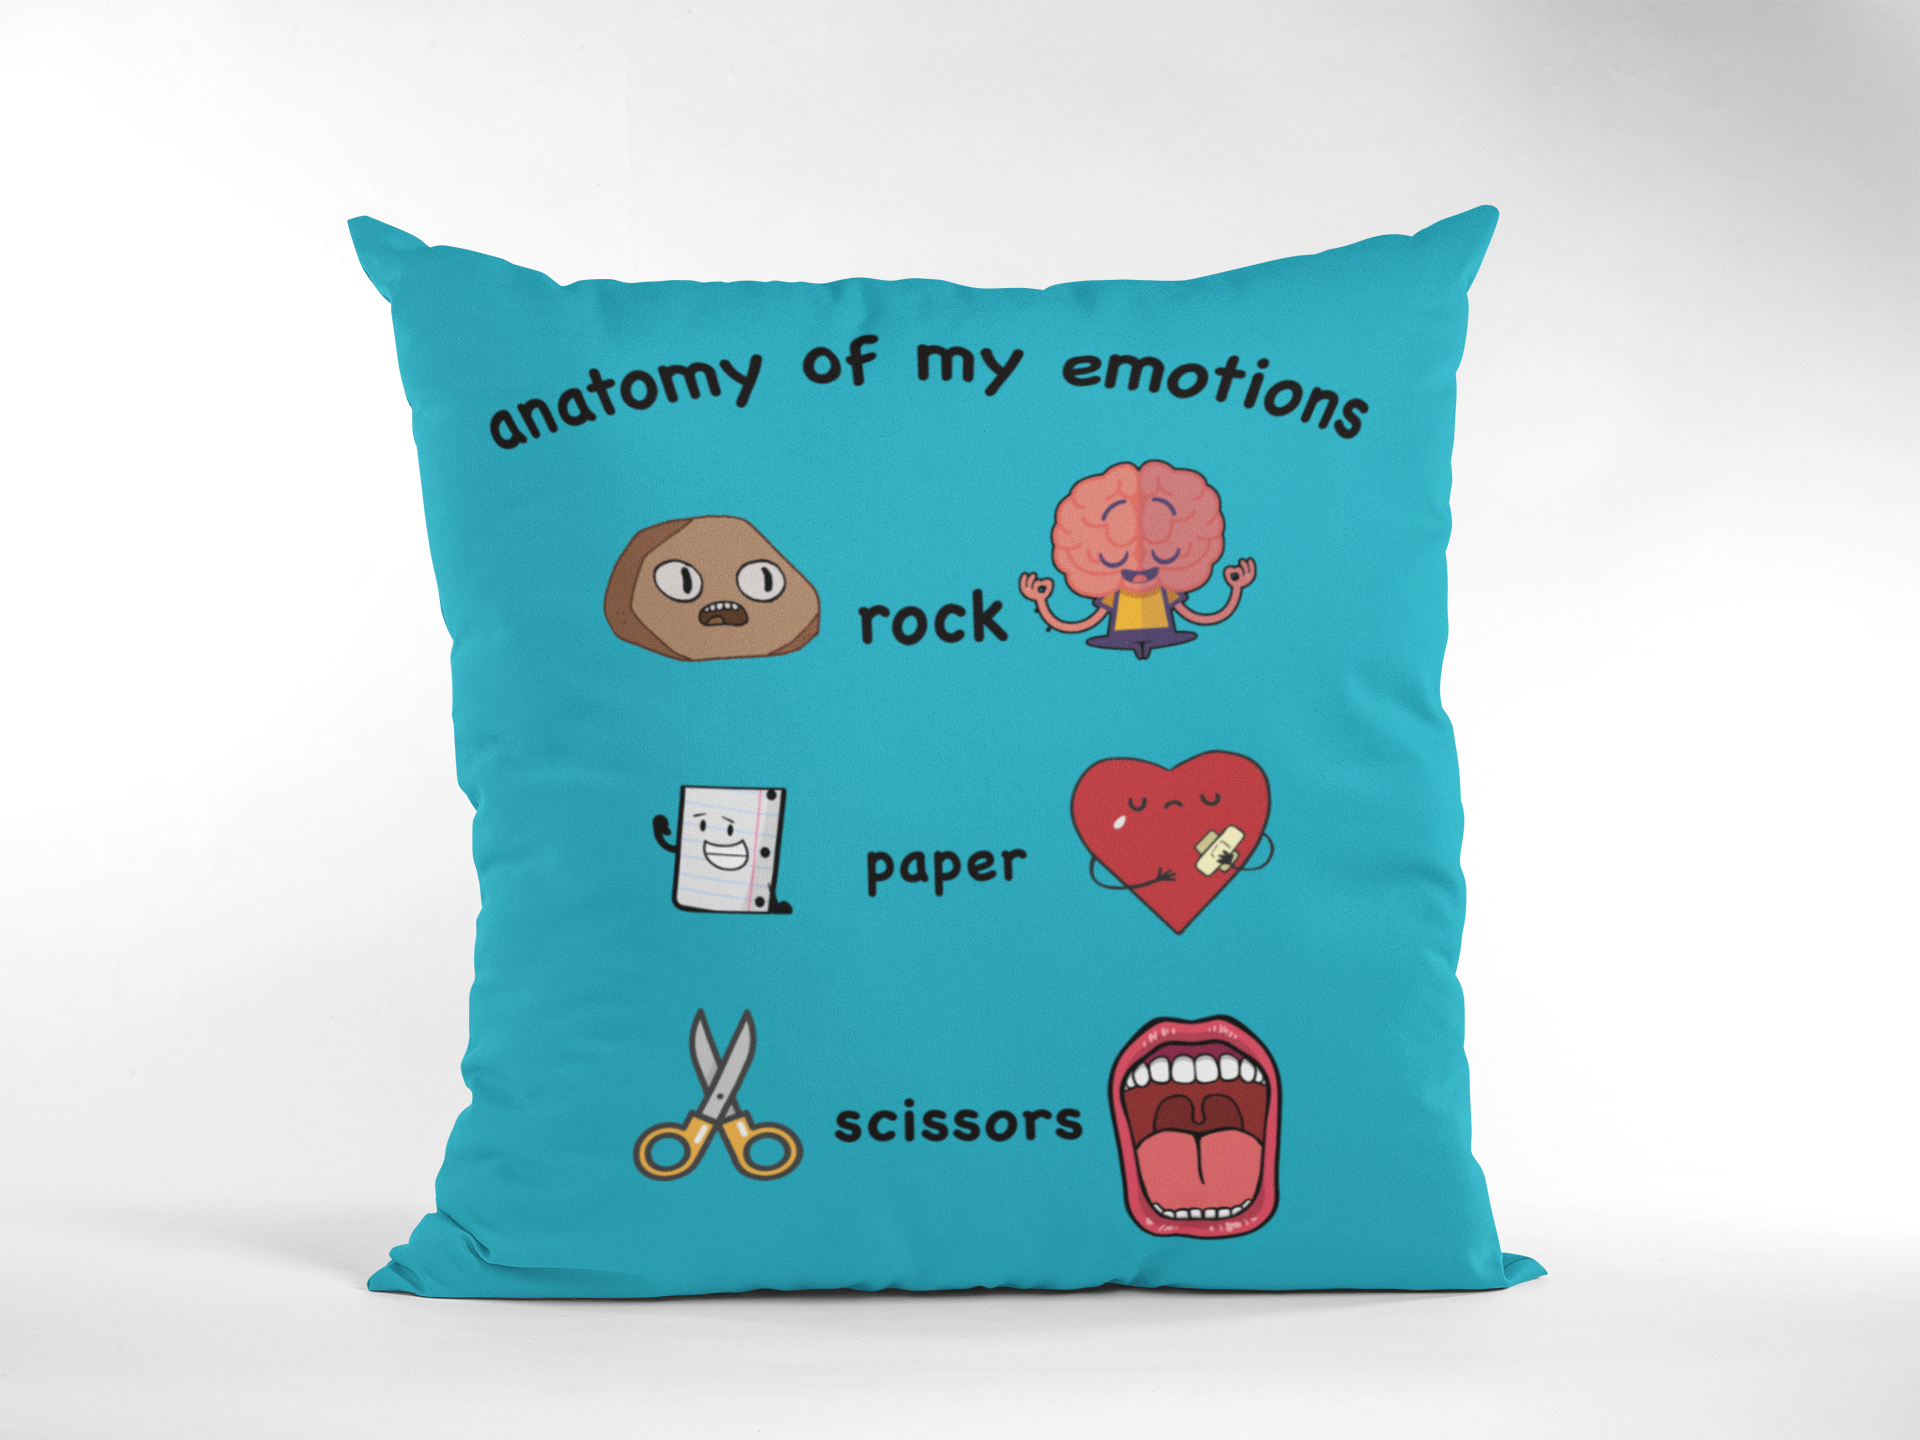 Anatomy of My Emotions Cushion Cover